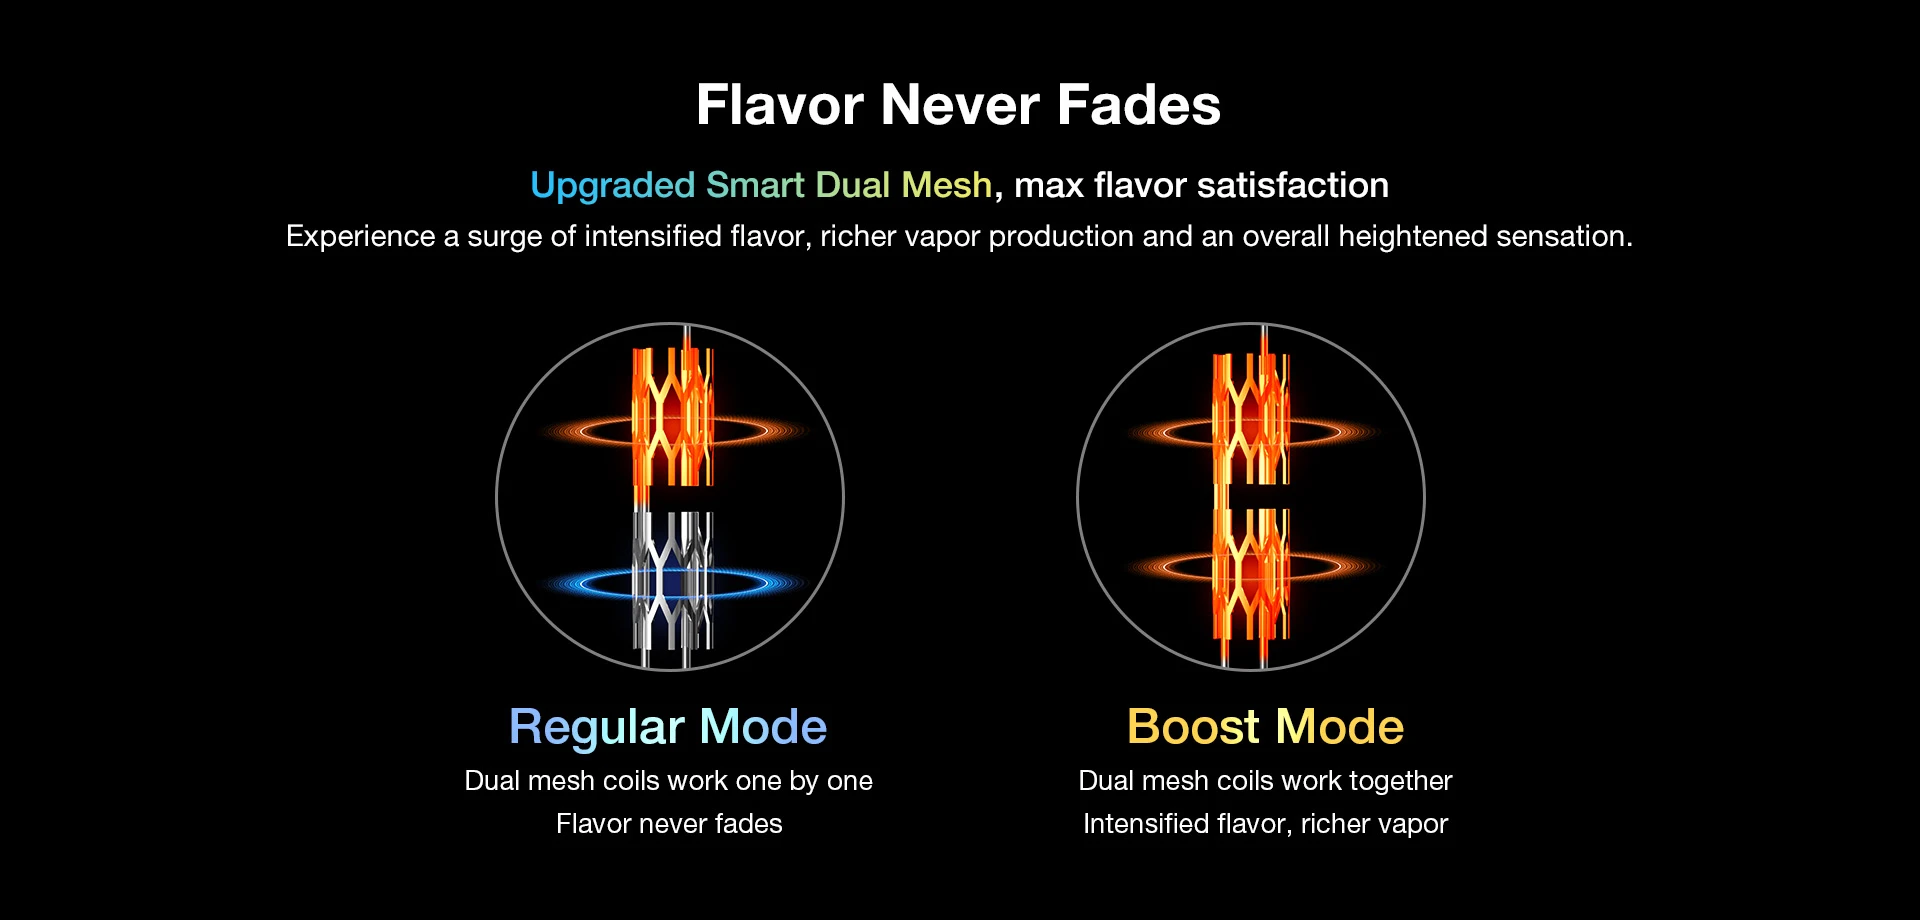 Flavor Never Fades Upgraded Smart Dual Mesh, max flavor satisfaction Experience a surge of intensified flavor, richer vapor production and an overall heightened sensation.